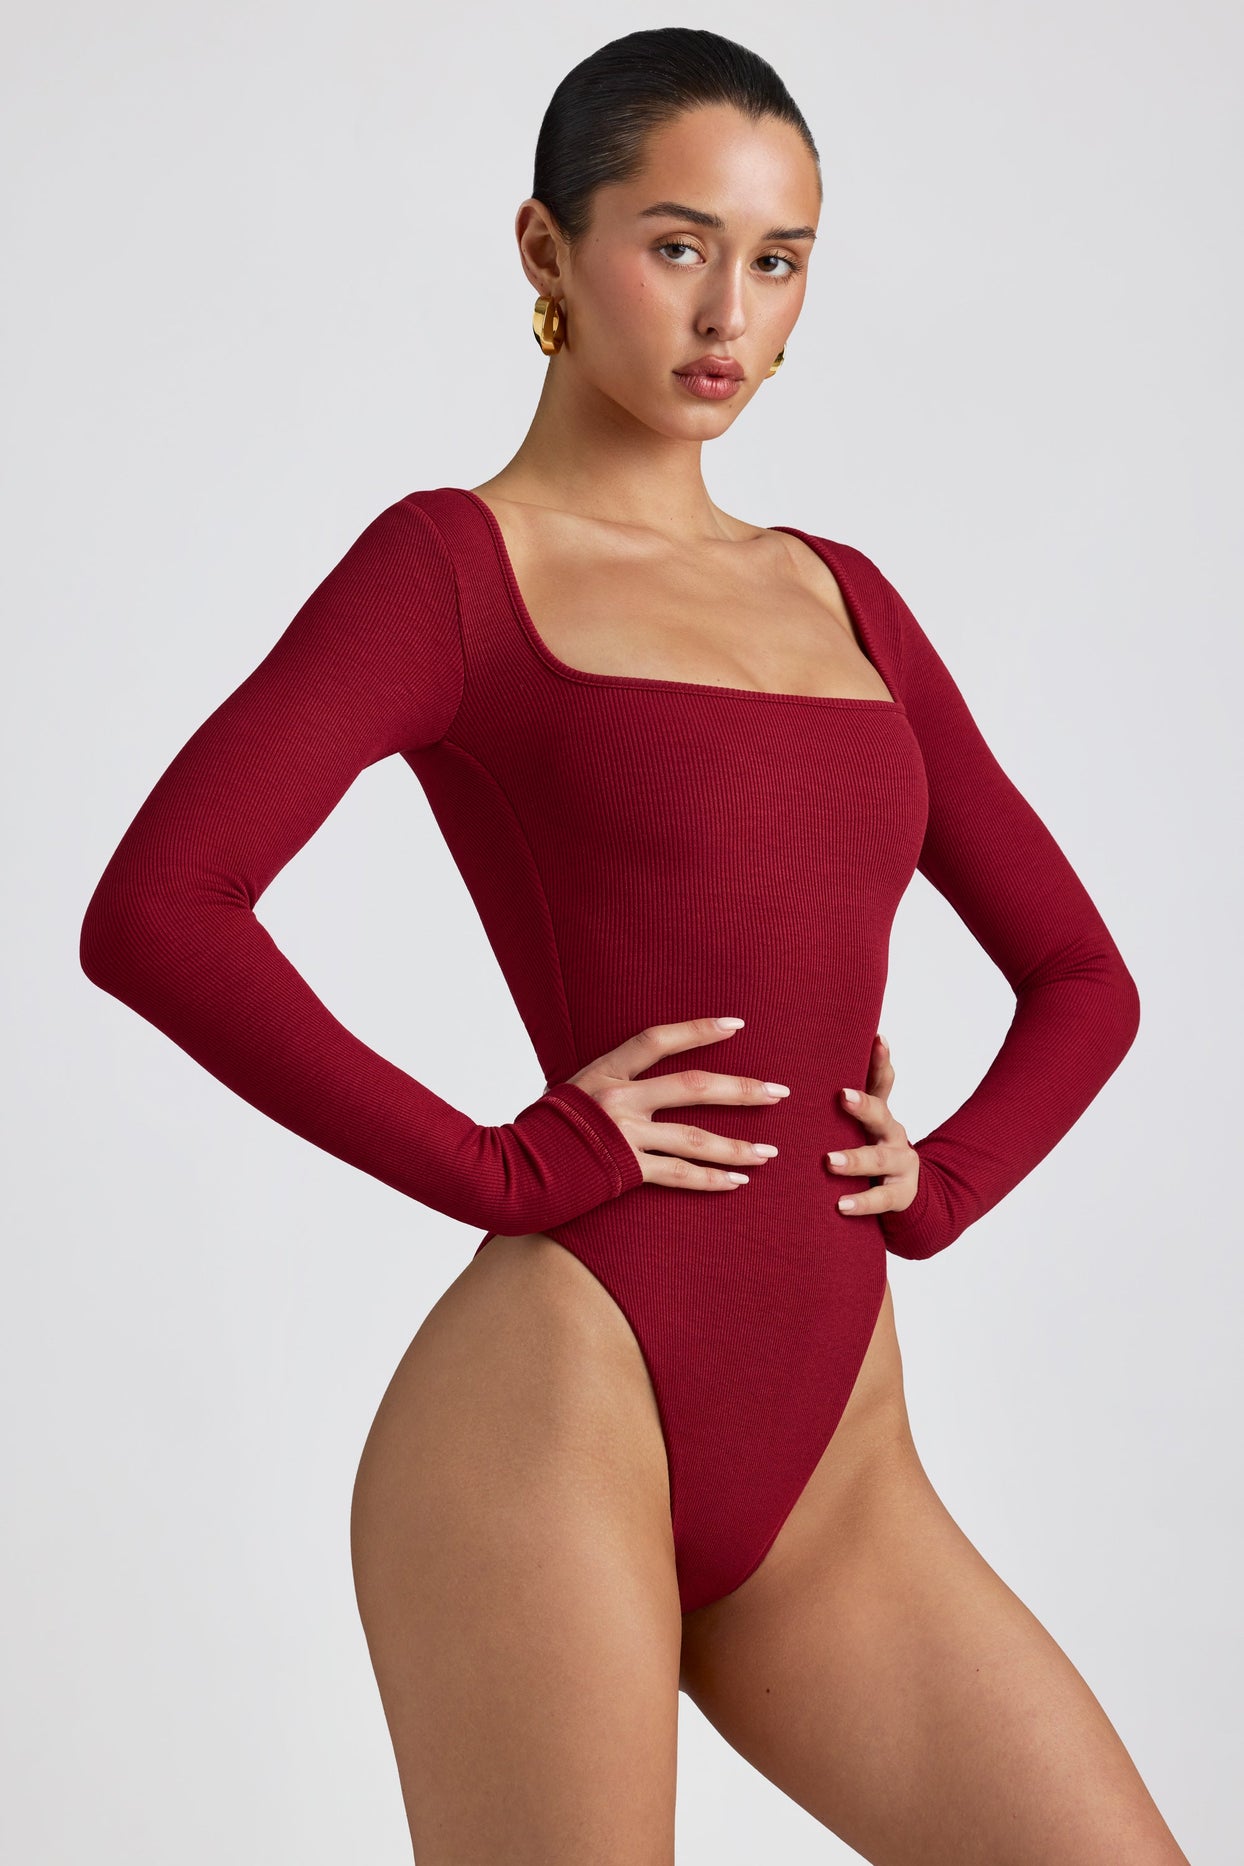 Women Express red, long sleeve body suit. Size large. Prev